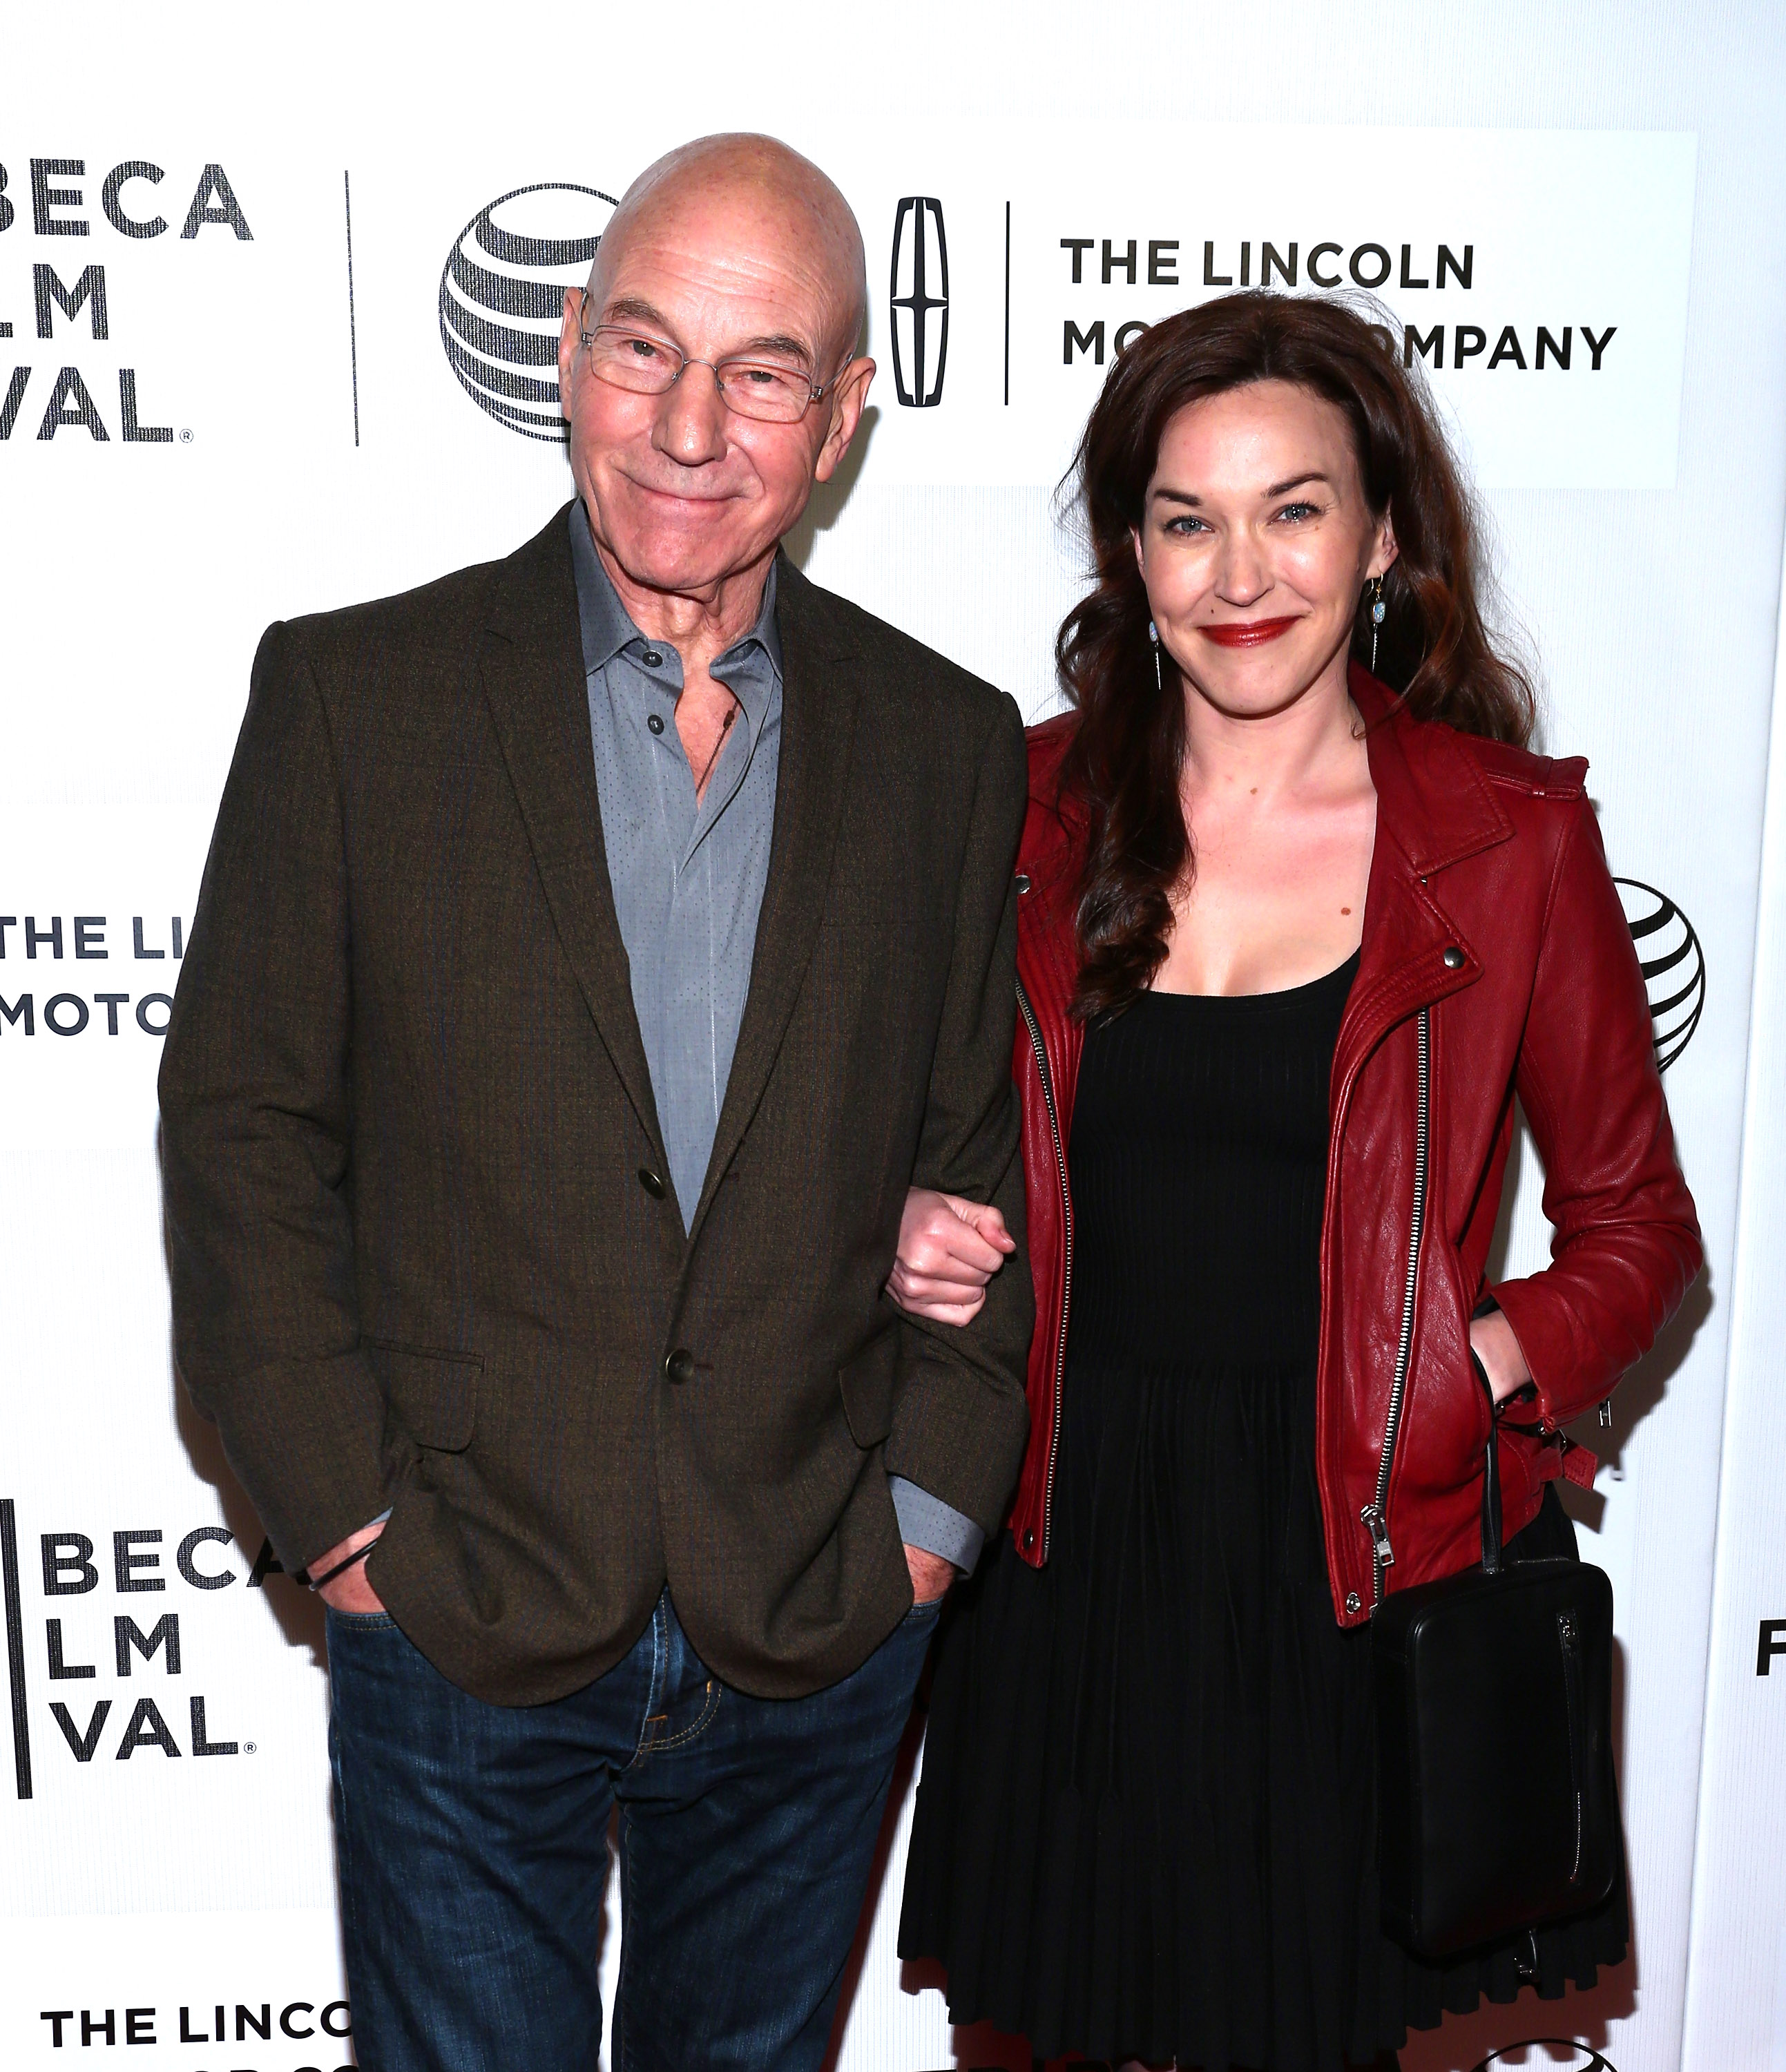 Patrick Stewart and Sunny Ozell at the "Match" screening in New York City on April 18, 2014 | Source: Getty Images